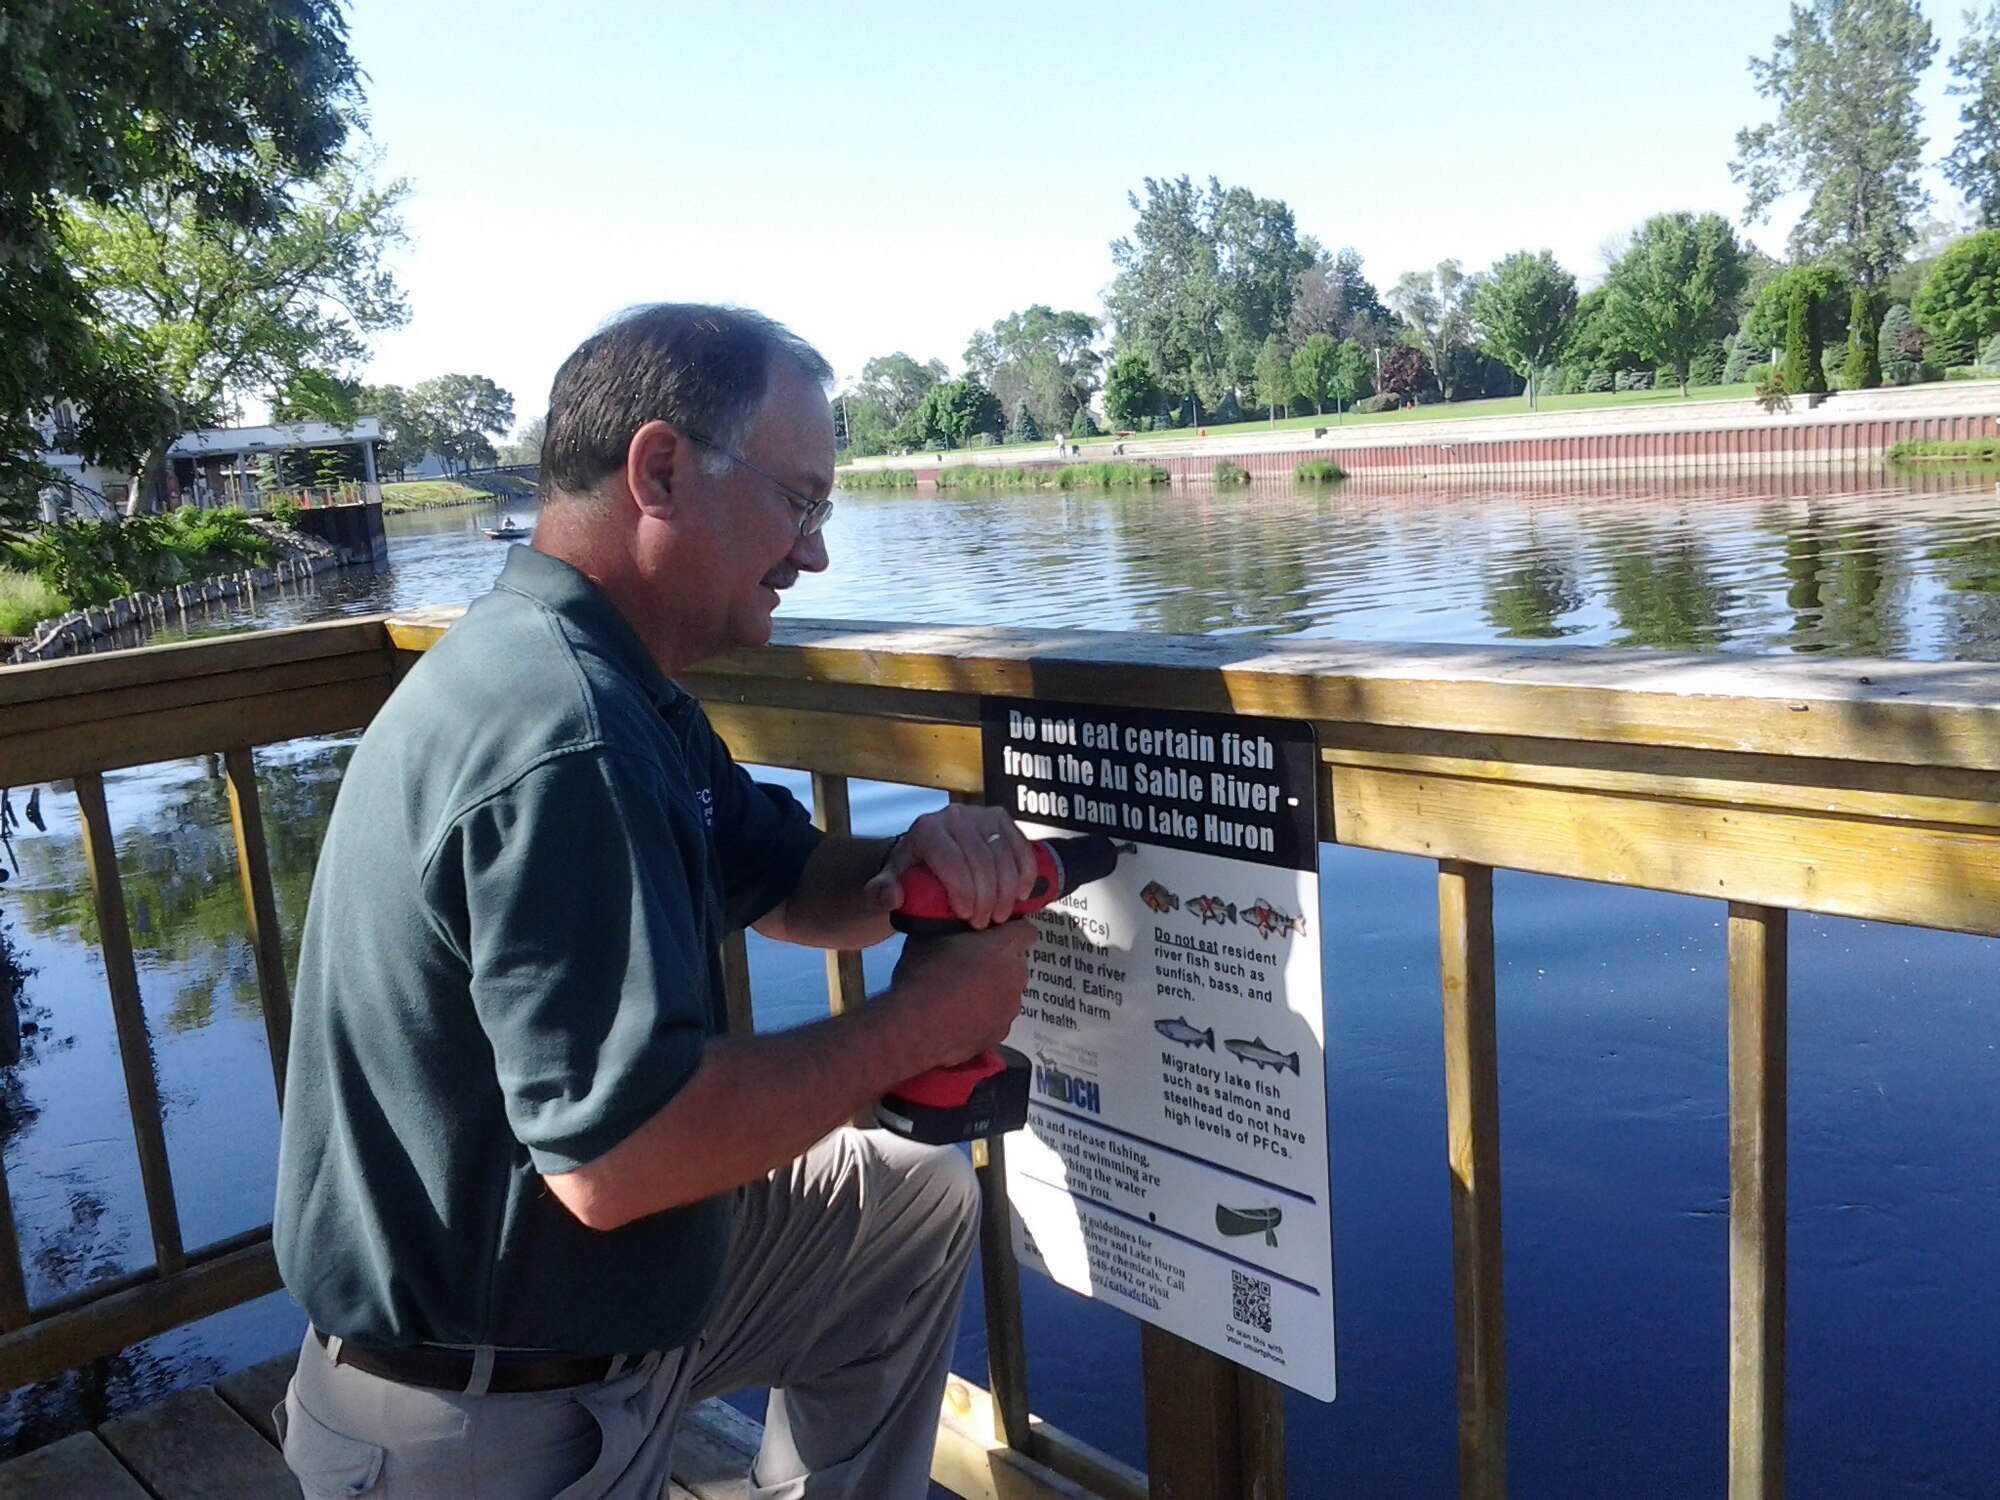 FORMER WURTSMITH AIR FORCE BASE, Mich. -- Dave Strainge, Air Force Civil Engineer Center environmental coordinator for the former Wurtsmith Air Force Base, puts up a fishing advisory sign June 26, 2013, on the AuSable River. The signage is one of the ways AFCEC is working with state health and environmental agencies to inform residents of the presence of perflourinated compounds, an emerging contaminant found in fish samples taken from the river in 2012. The center works closely with the Environmental Protection Agency and the Michigan Department of Environmental Quality to ensure environmental cleanup activities satisfy all regulatory standards while protecting human health and the environment. Strainge is a member of the AFCEC Installations Directorate base realignment and closure program management division. (Courtesy photo)